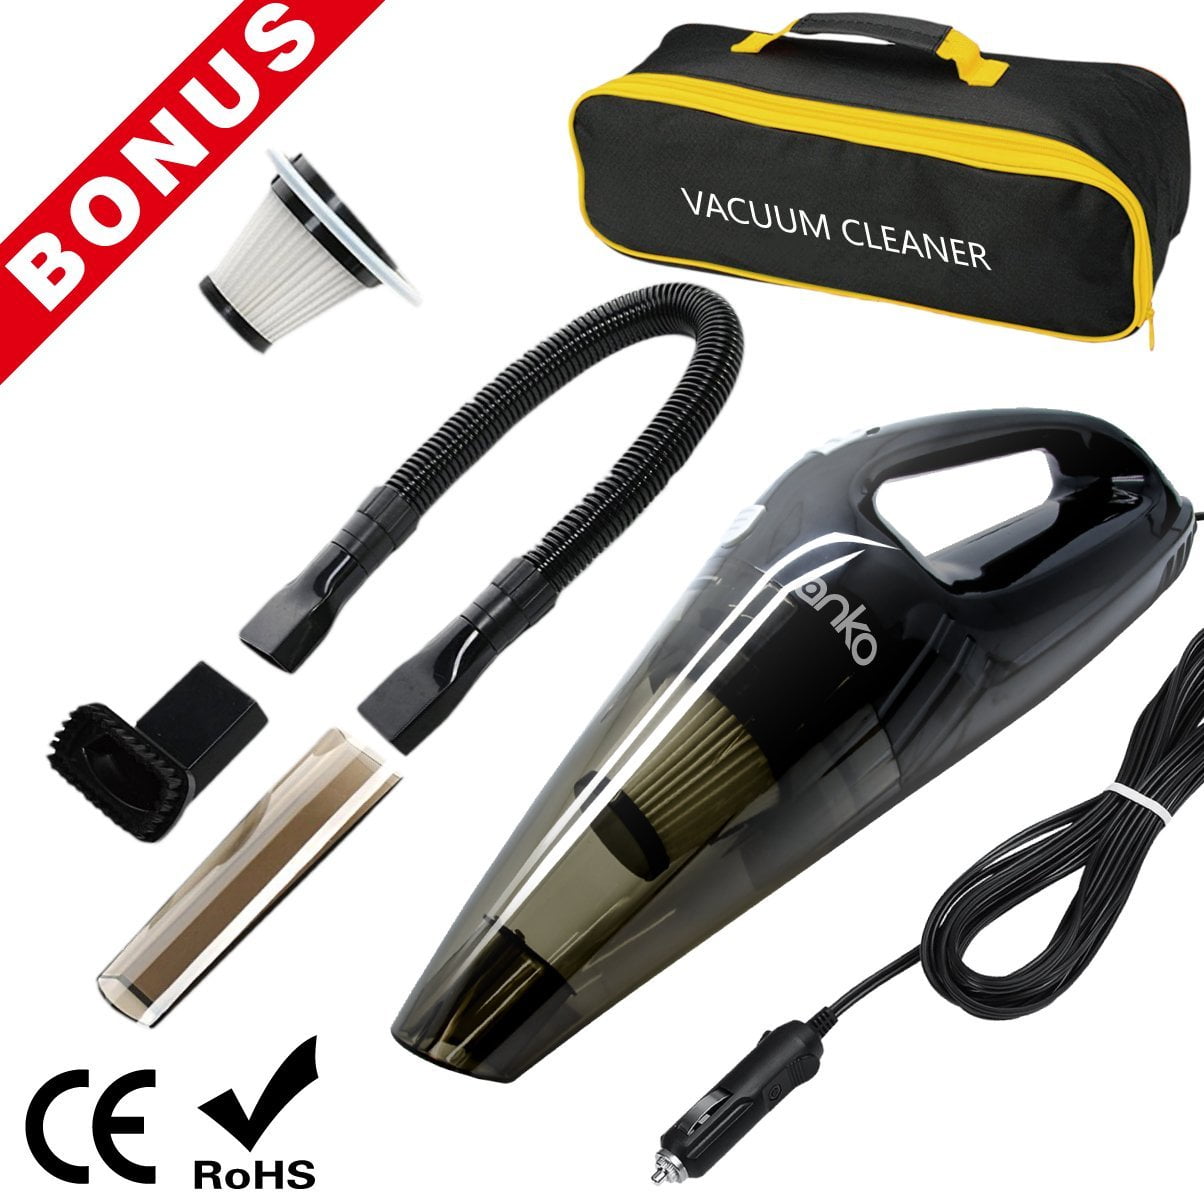 Upgraded Car Vacuum Cleaner, ANKO High Power DC12-Volt ...